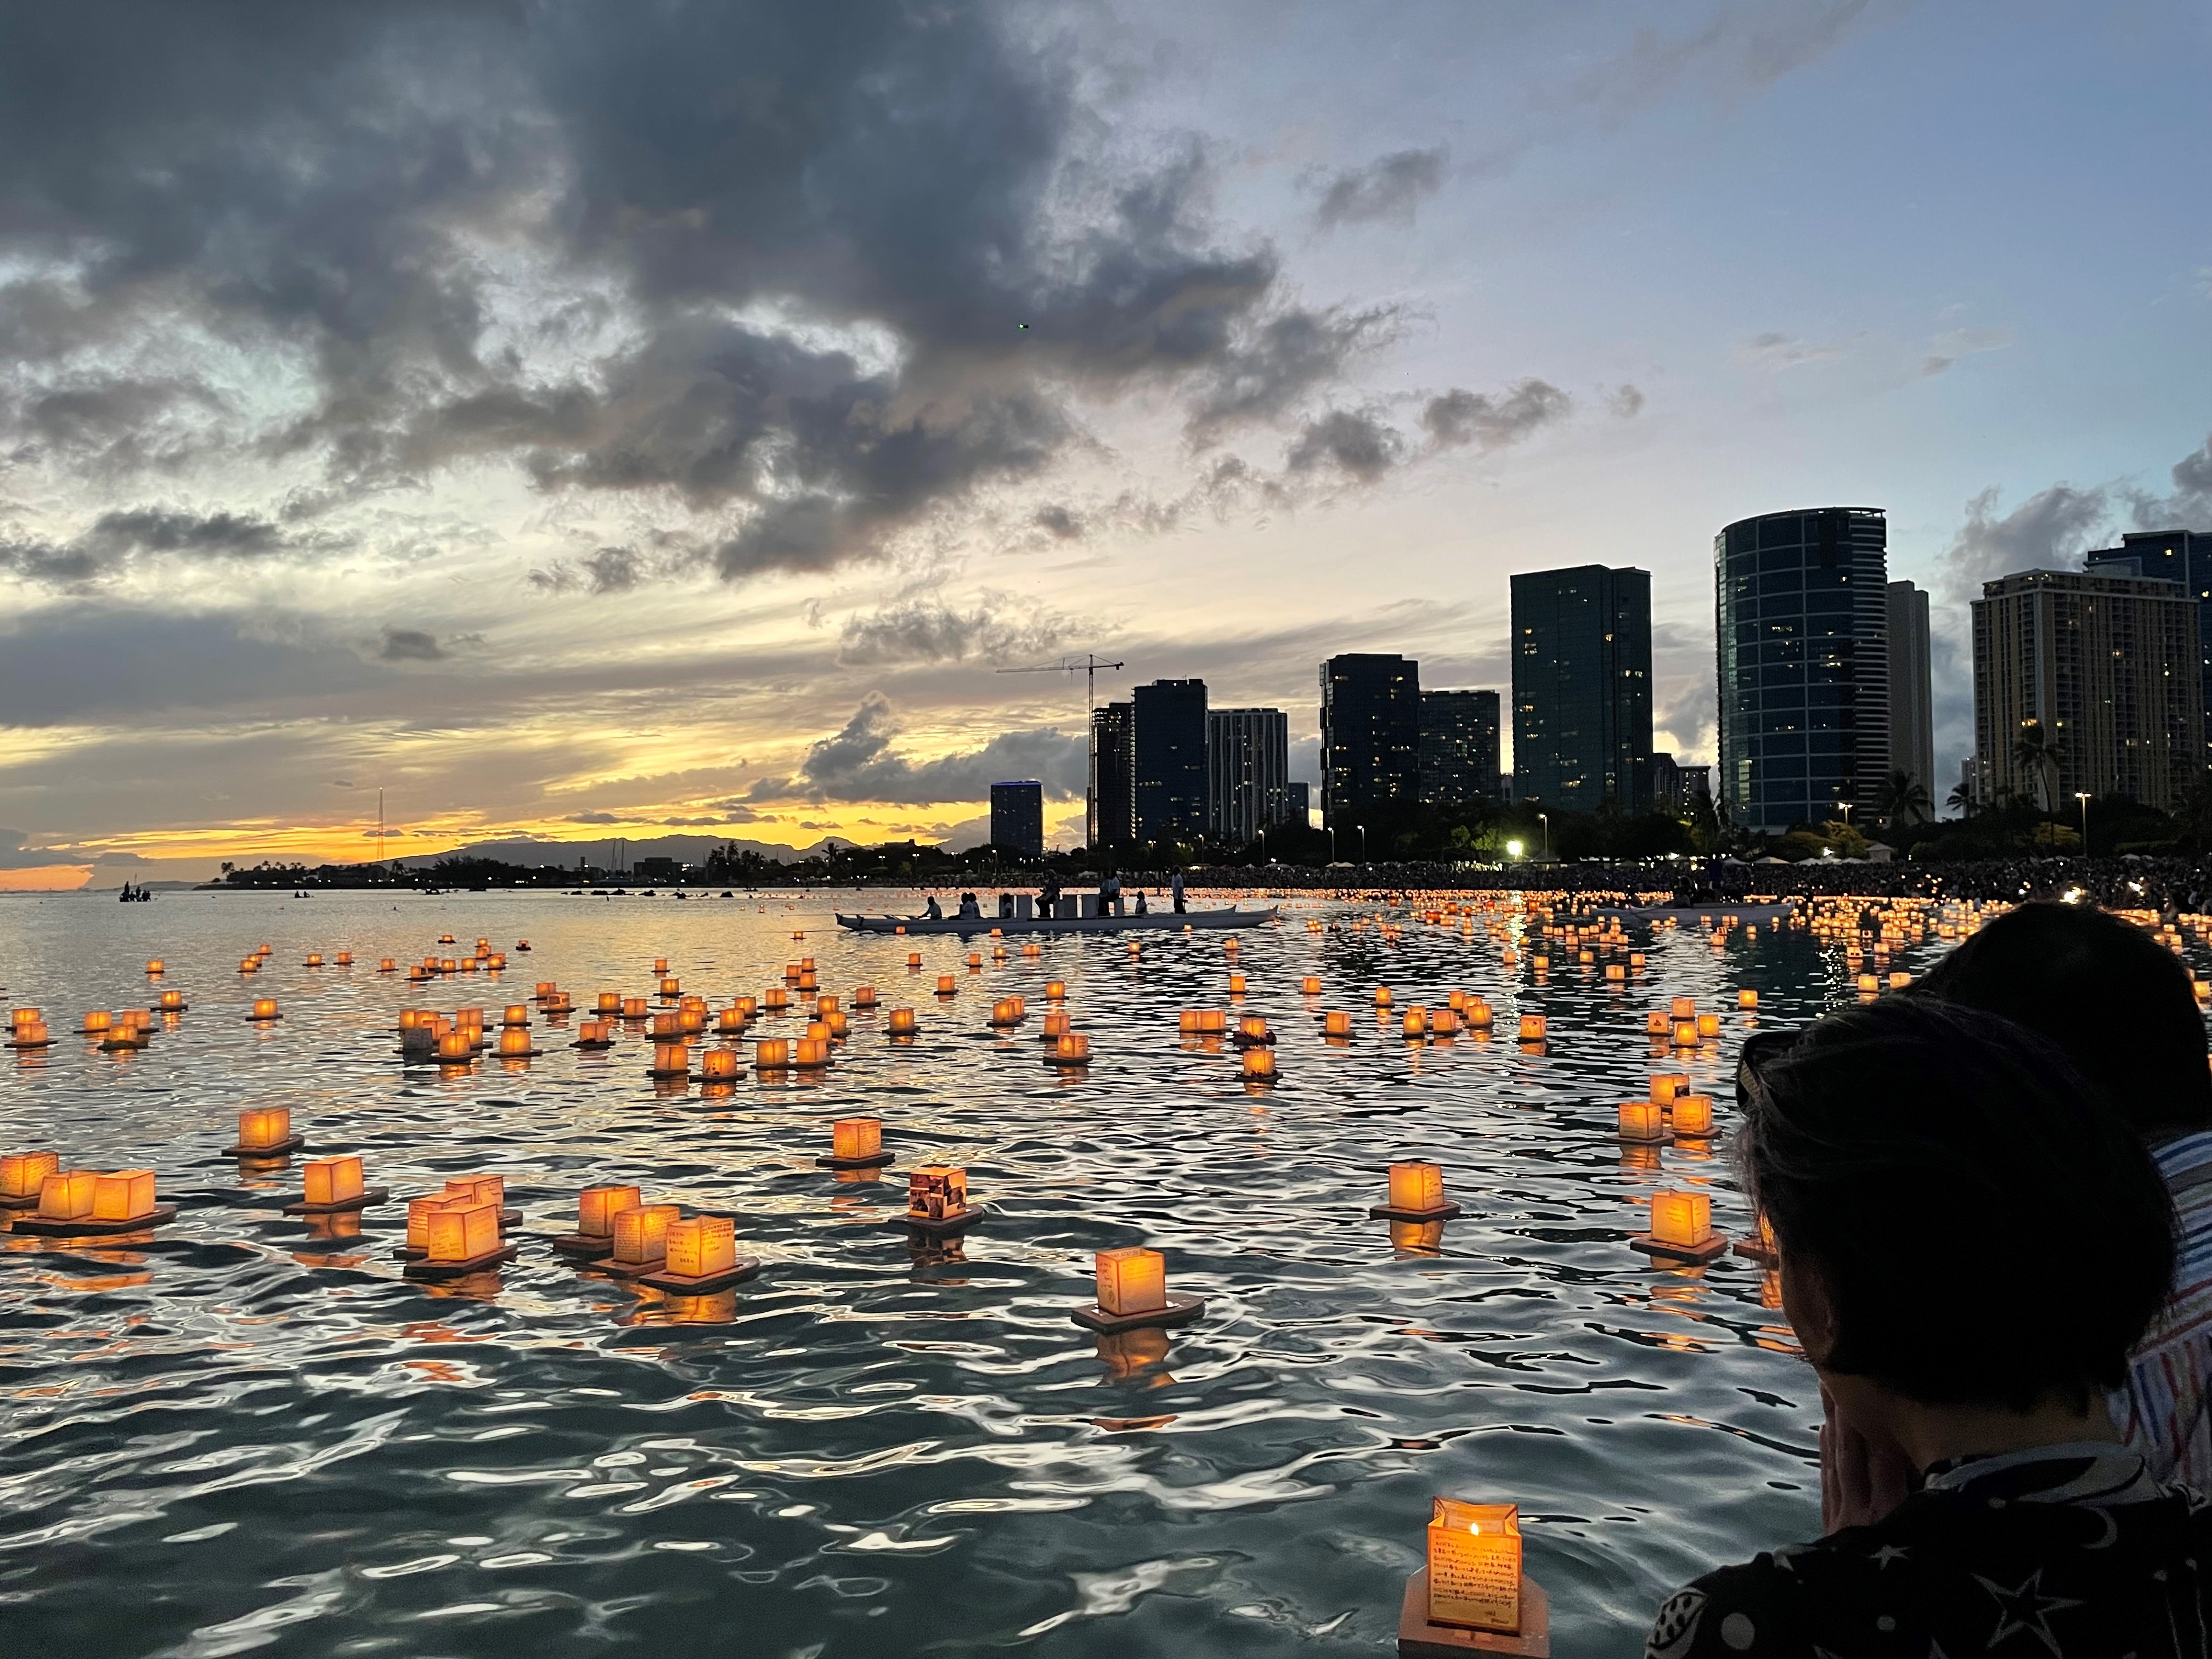 Photo of illuminated lanterns floating on the ocean with the cityscape of Honolulu in the background. It is night and the sky is dark with some sunset visible.